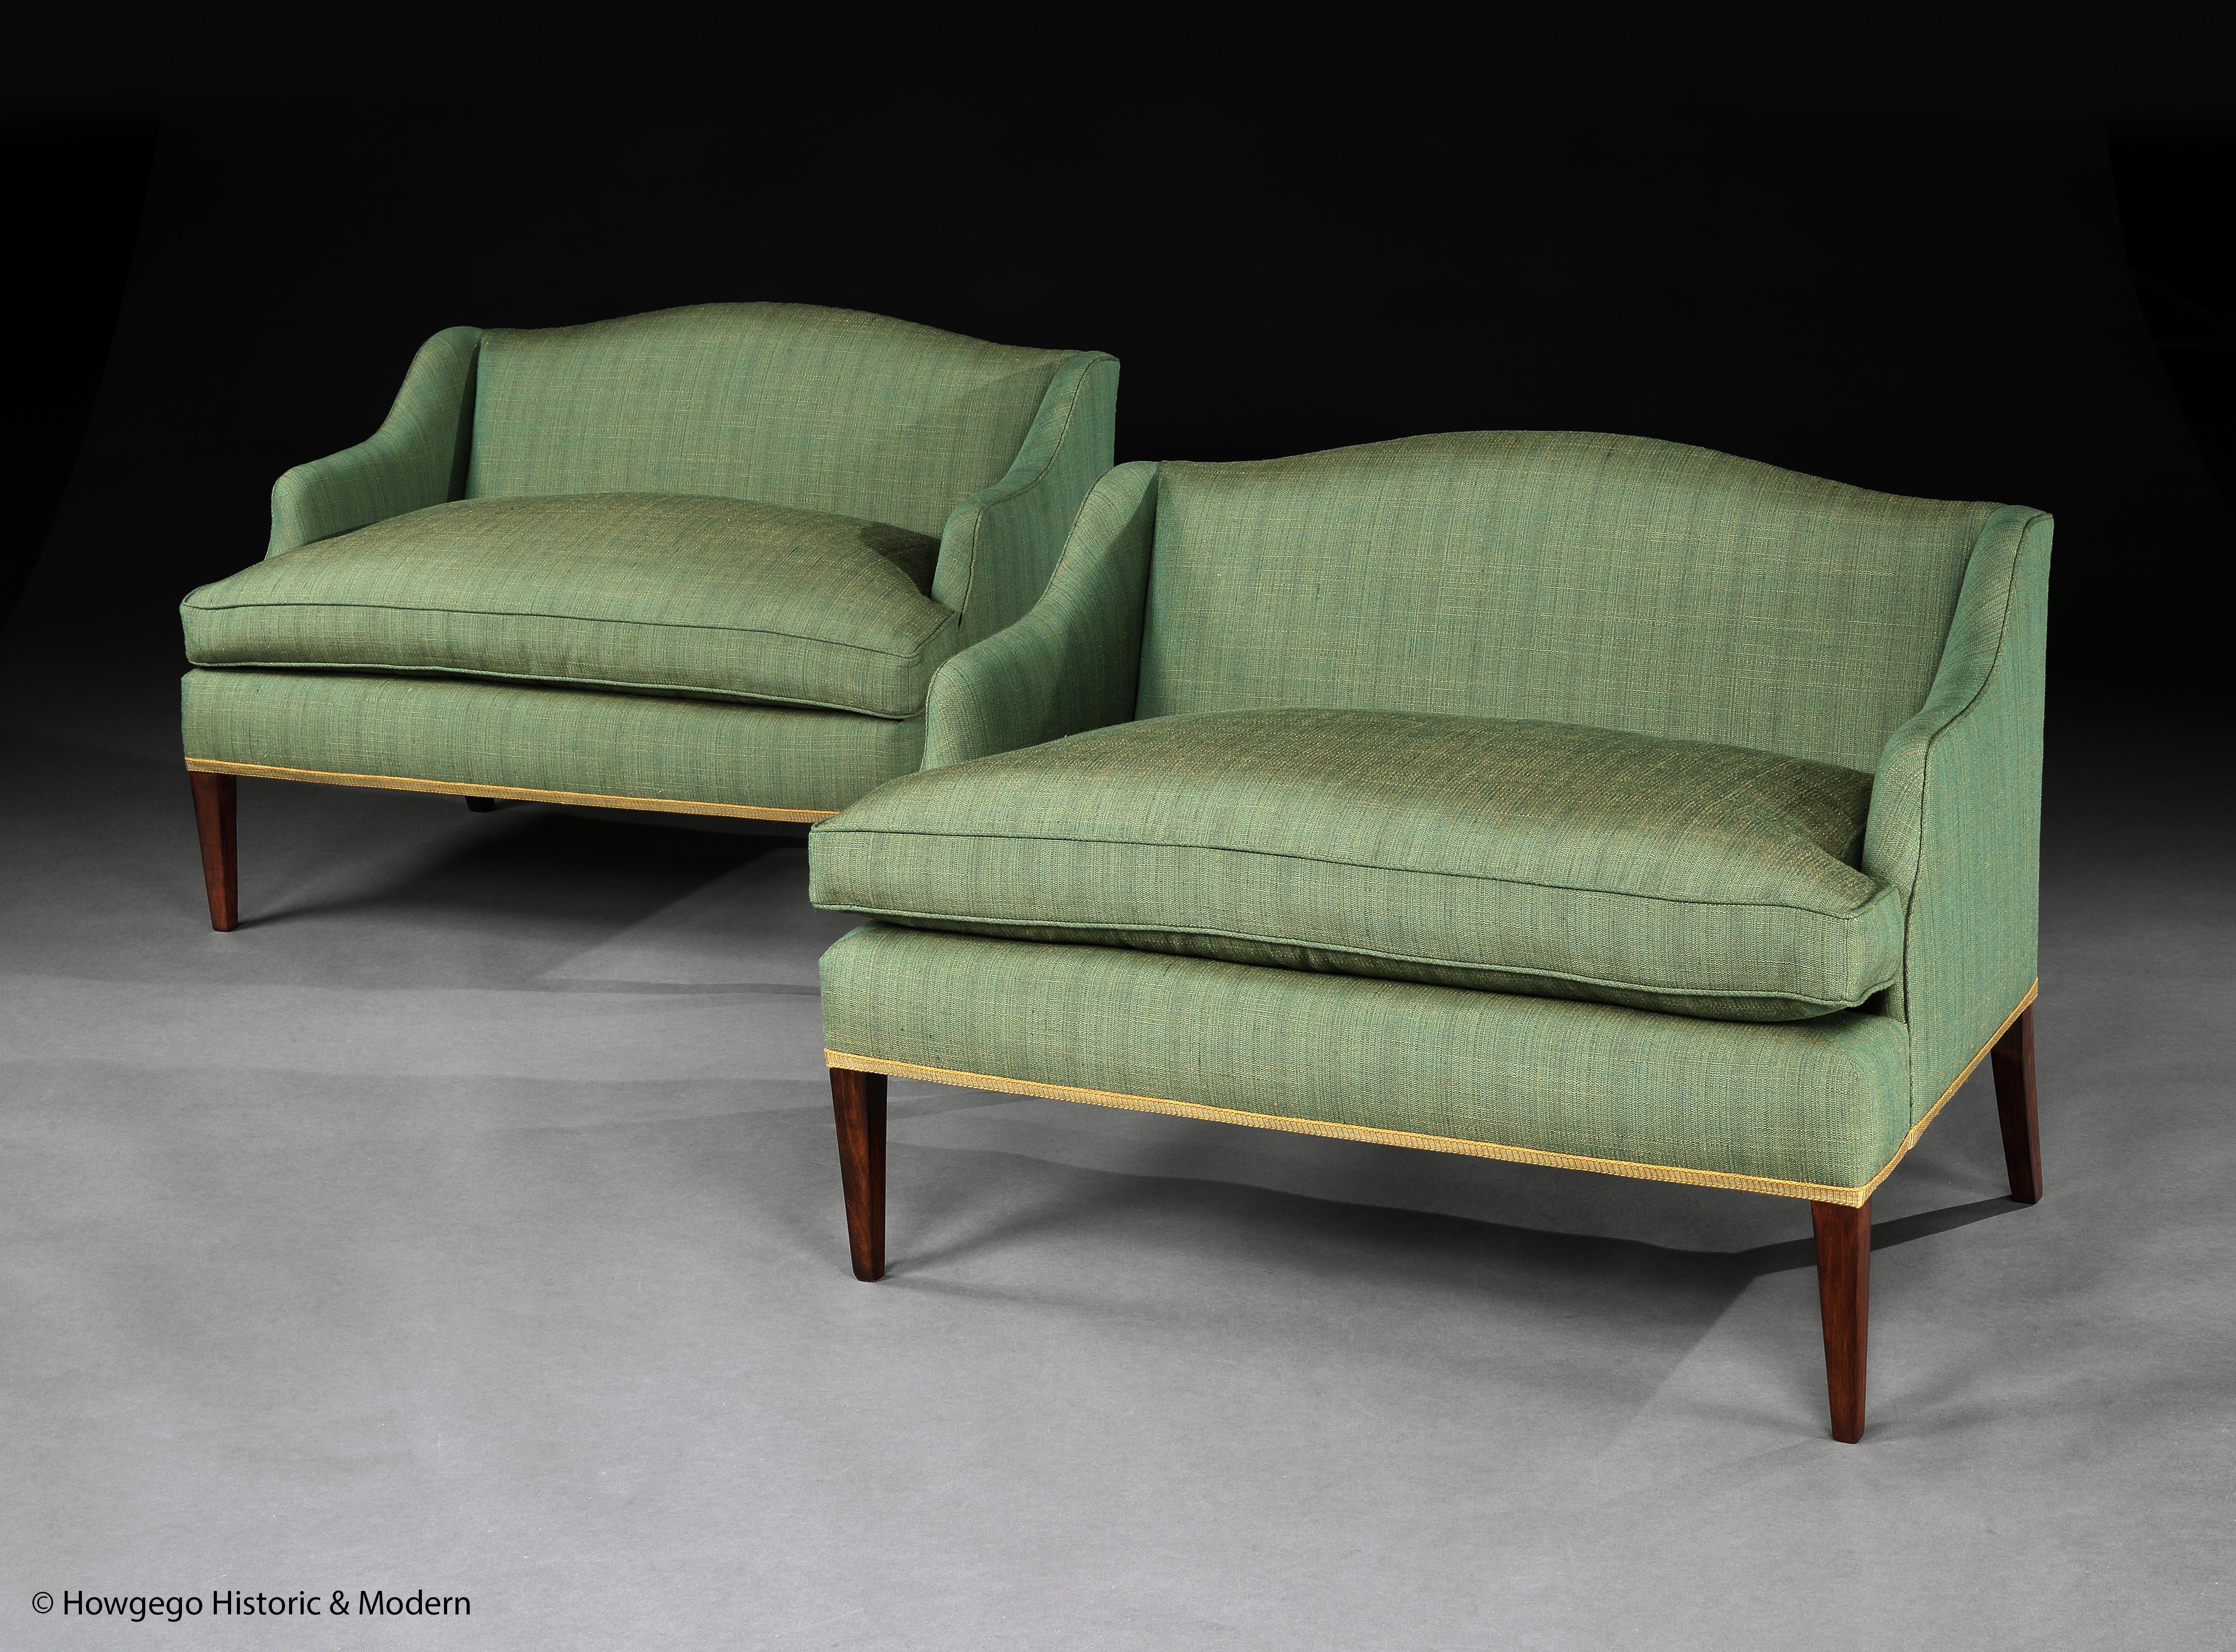 - Unusual petite pair of love seats 3ft 3in long
- 19th century, American, provenance from an American Collection in UK
- Contemporary feel; reupholstered by a French master craftsman in a special order green/gold mingle linen, self-piped and with